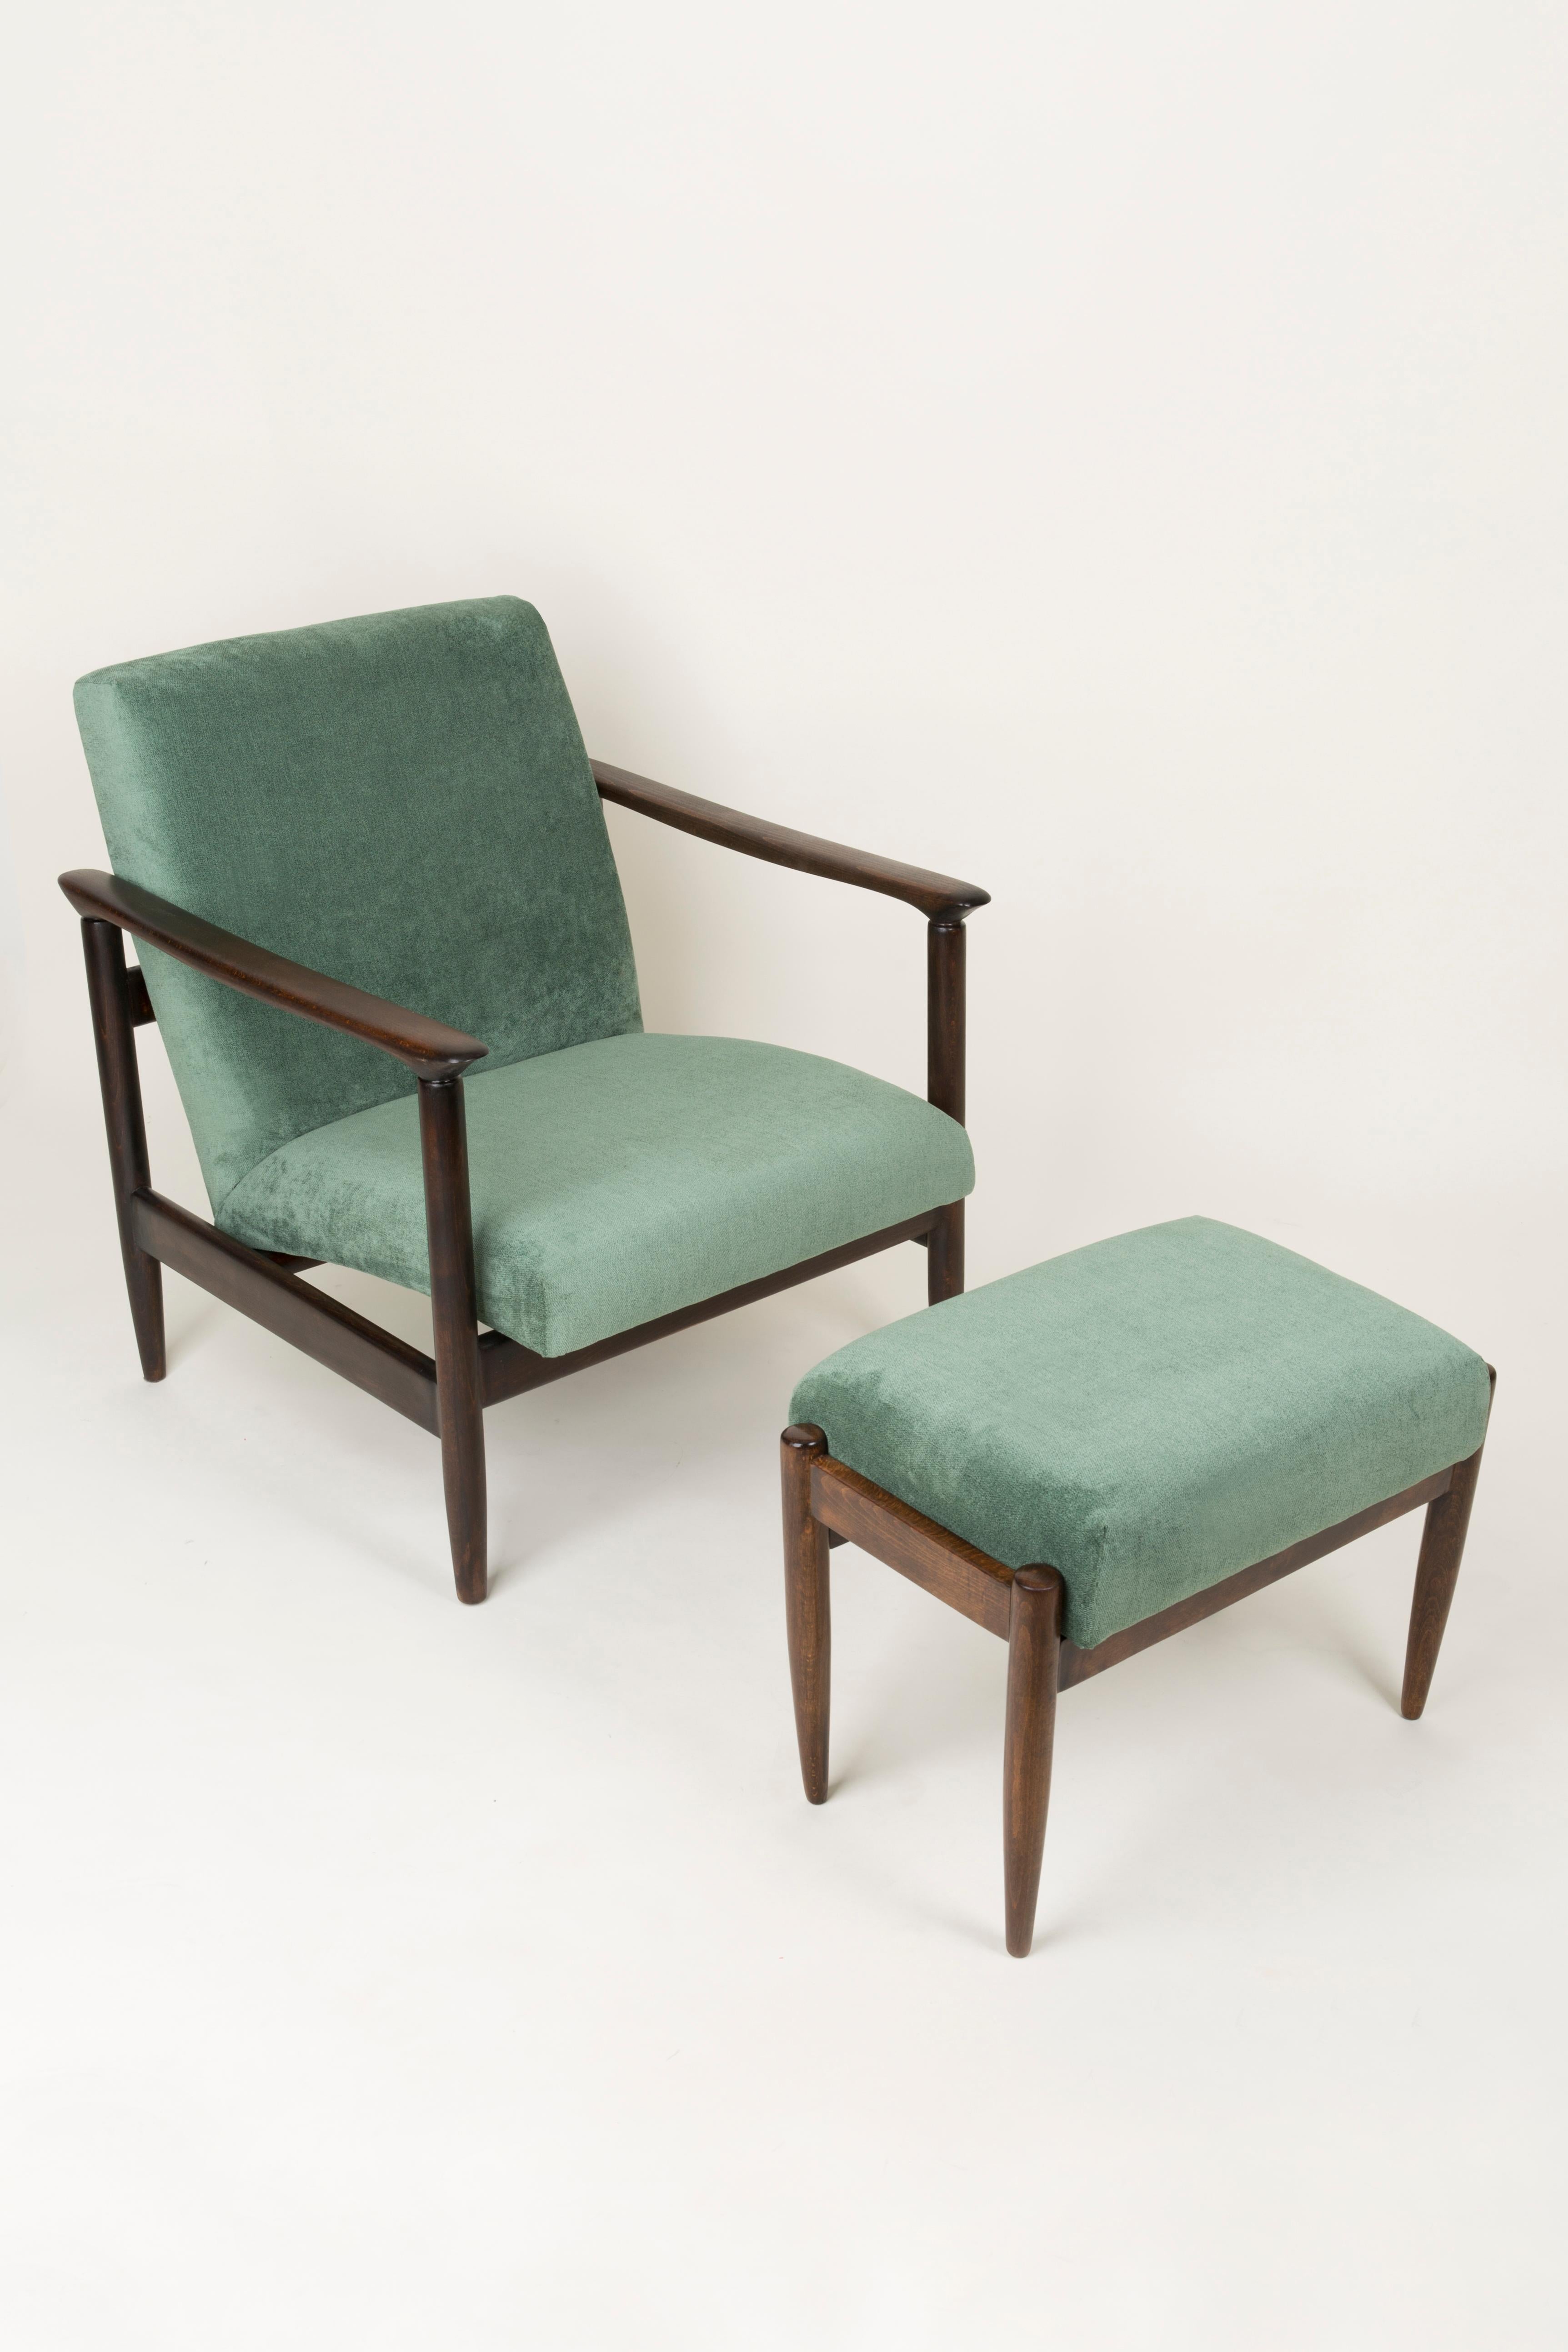 Hand-Crafted Green Apple Armchair and Stool, Edmund Homa, GFM-142, 1960s, Poland For Sale